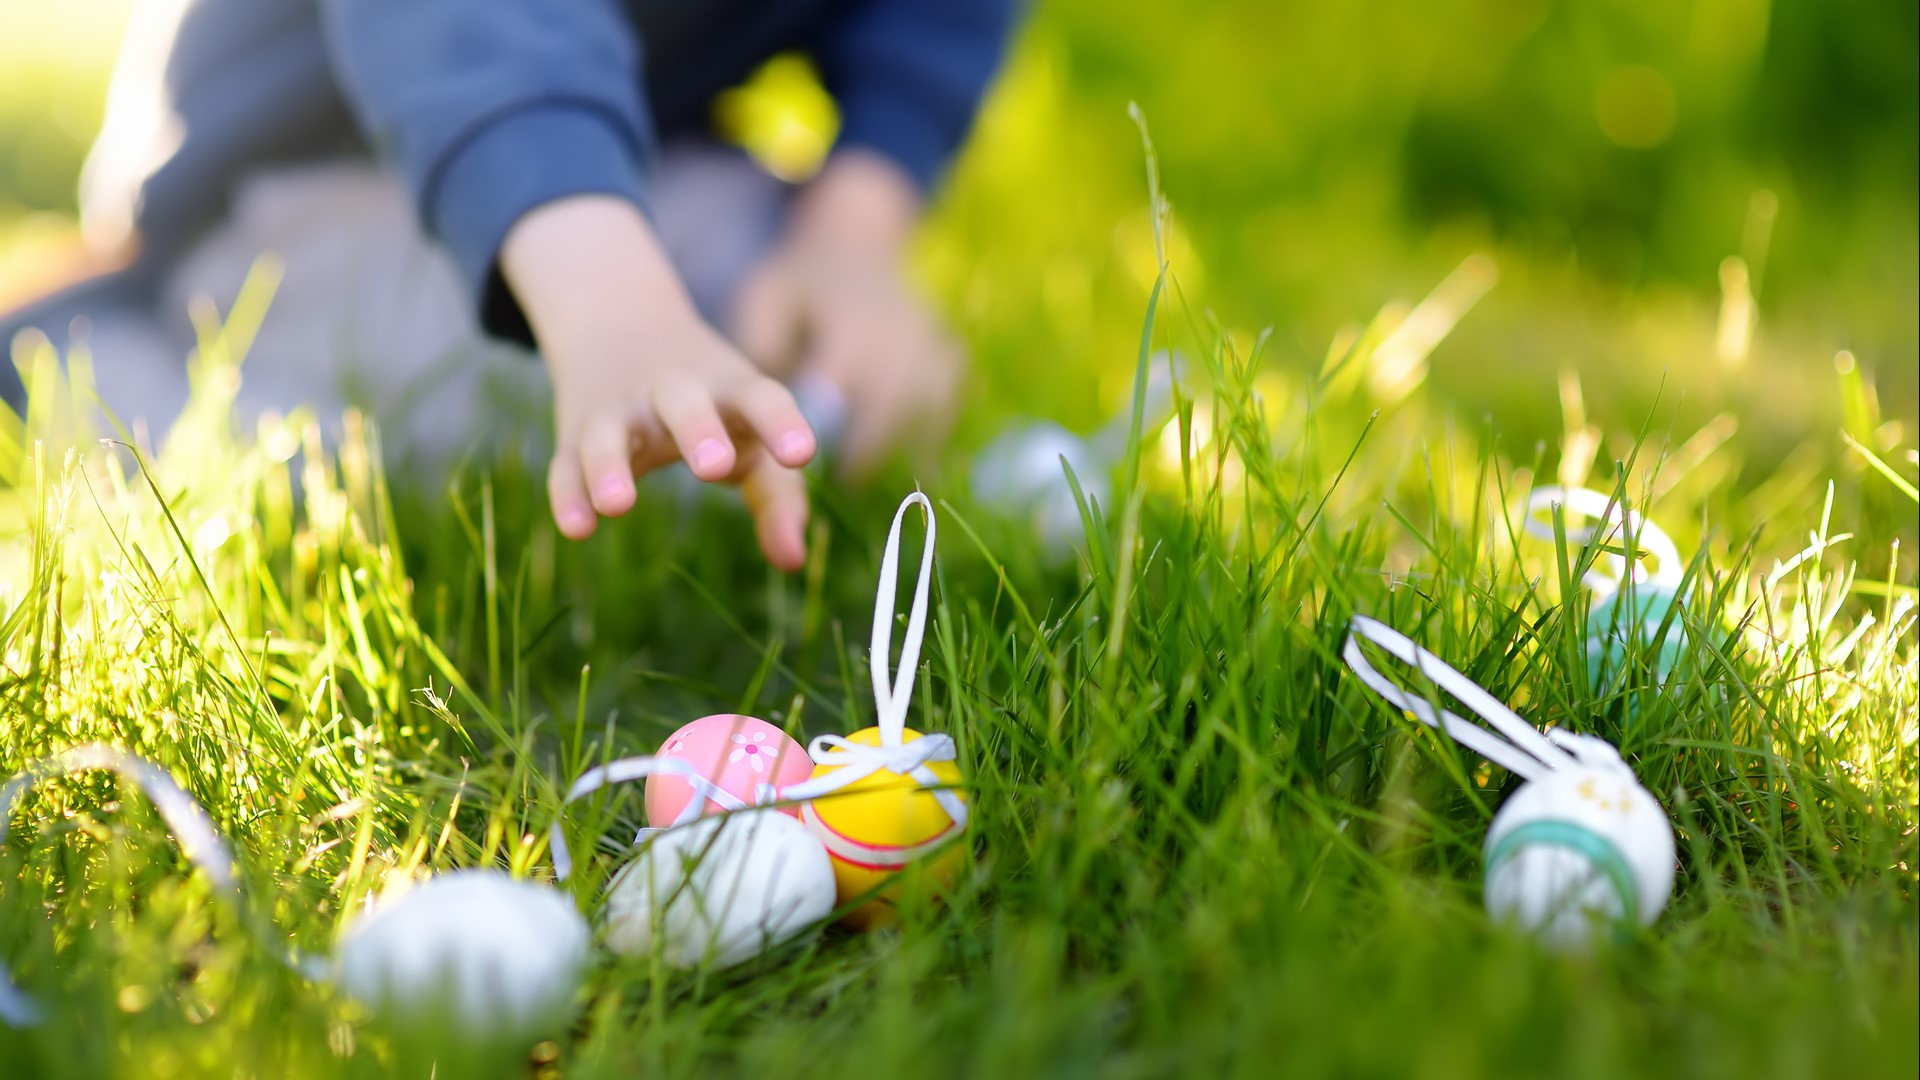 There are a lot of egg-citing events happening in St. Louis this weekend. From egg hunts to brunch, here's how the city is celebrating Easter.